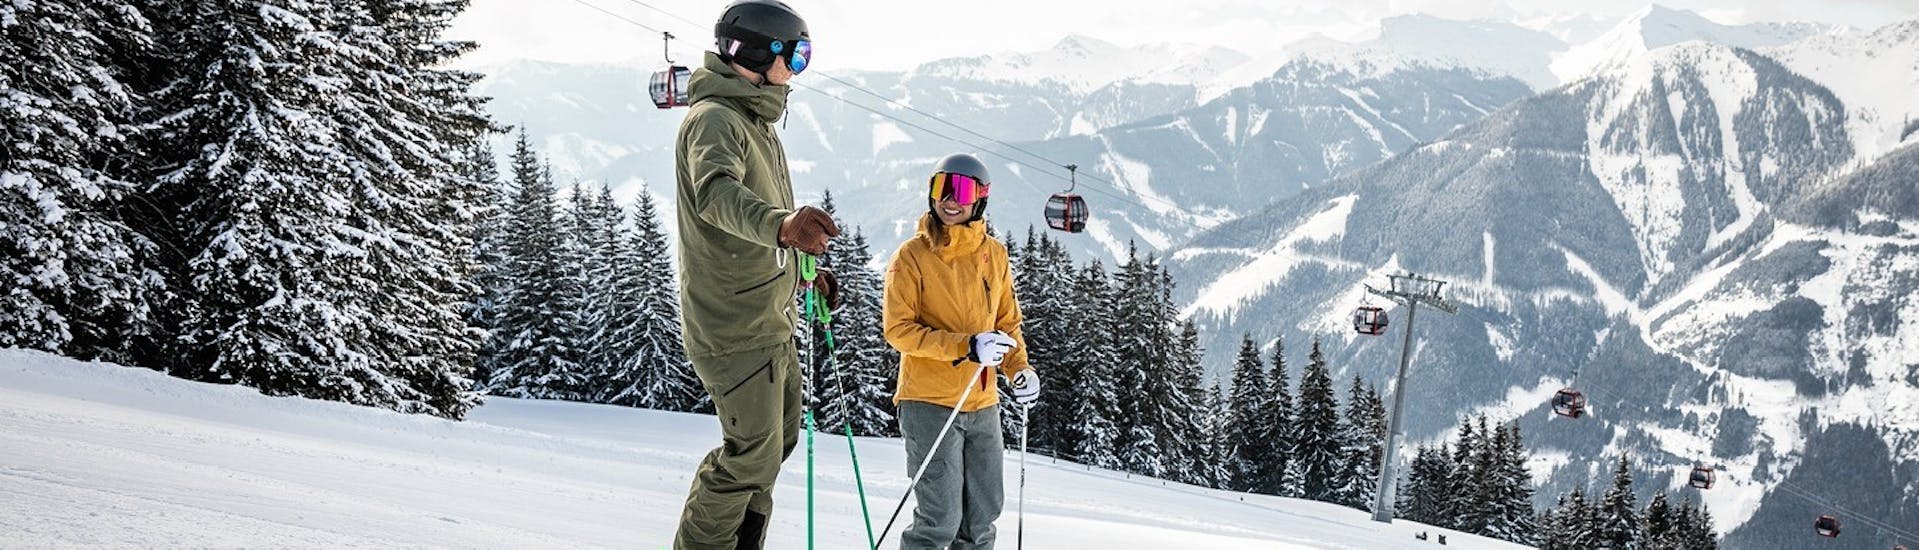 Two skiers enjoy the view of the Saalbach-Hinterglemm ski area during their private ski lessons for families with the OnSki ski school.